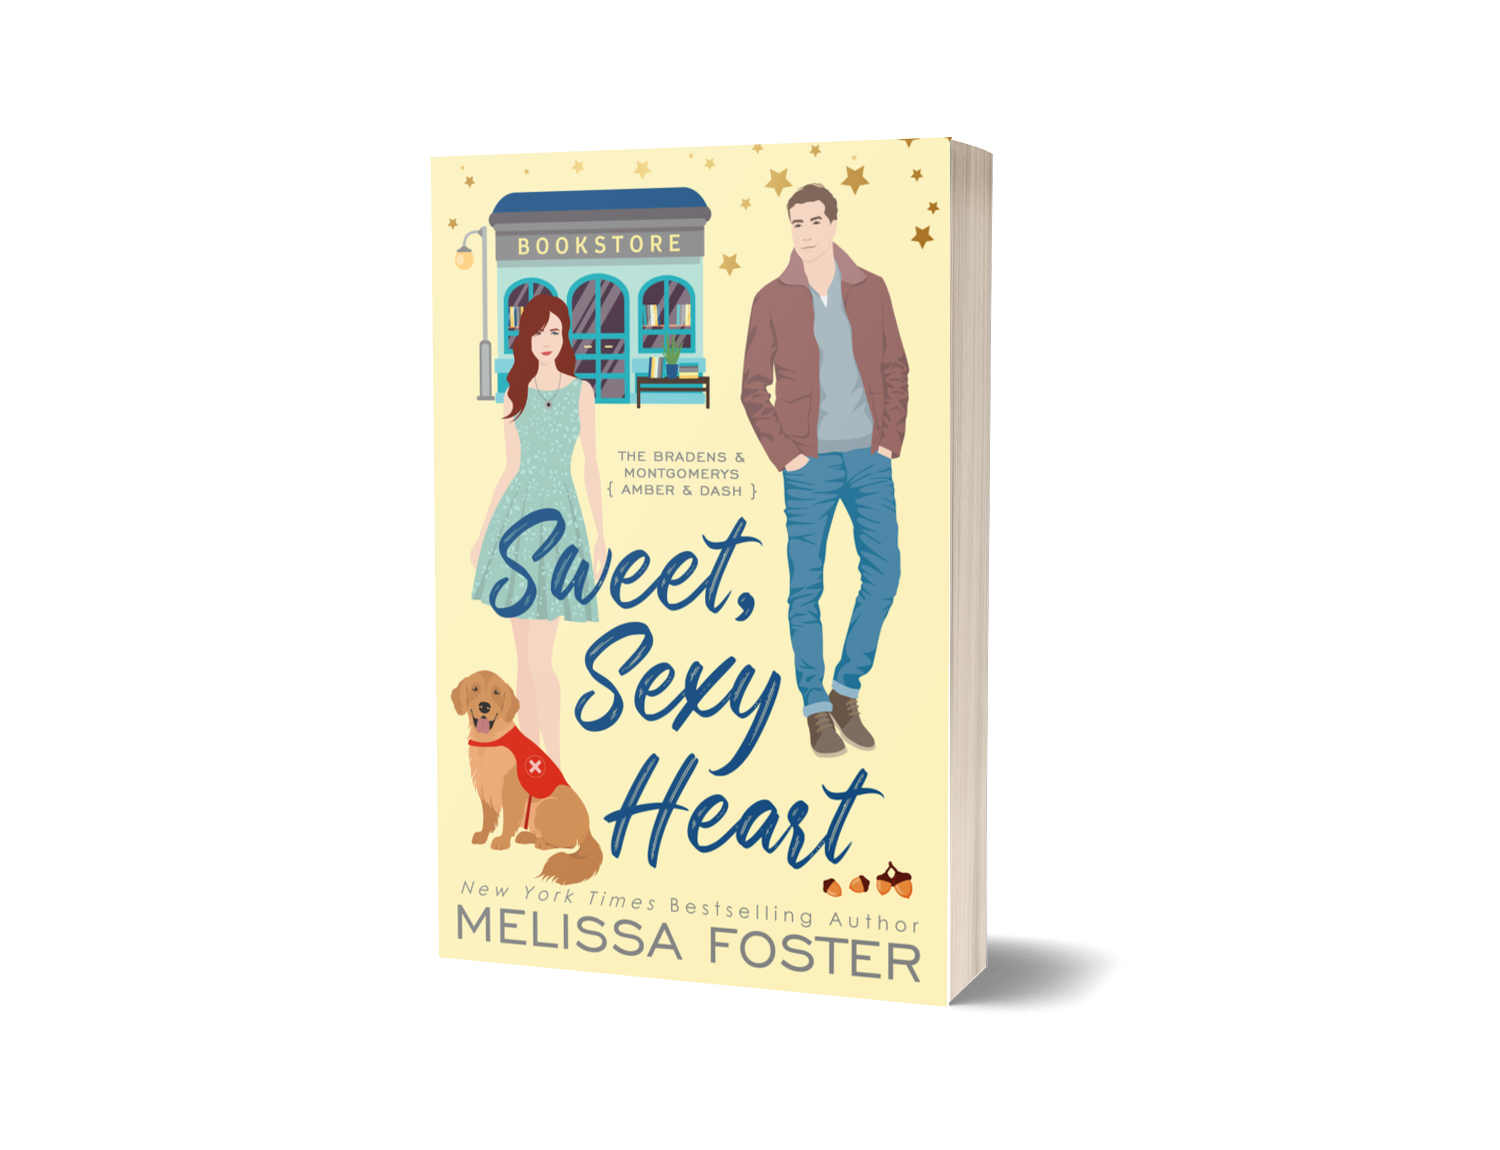 Sweet, Sexy Heart Special Edition Paperback